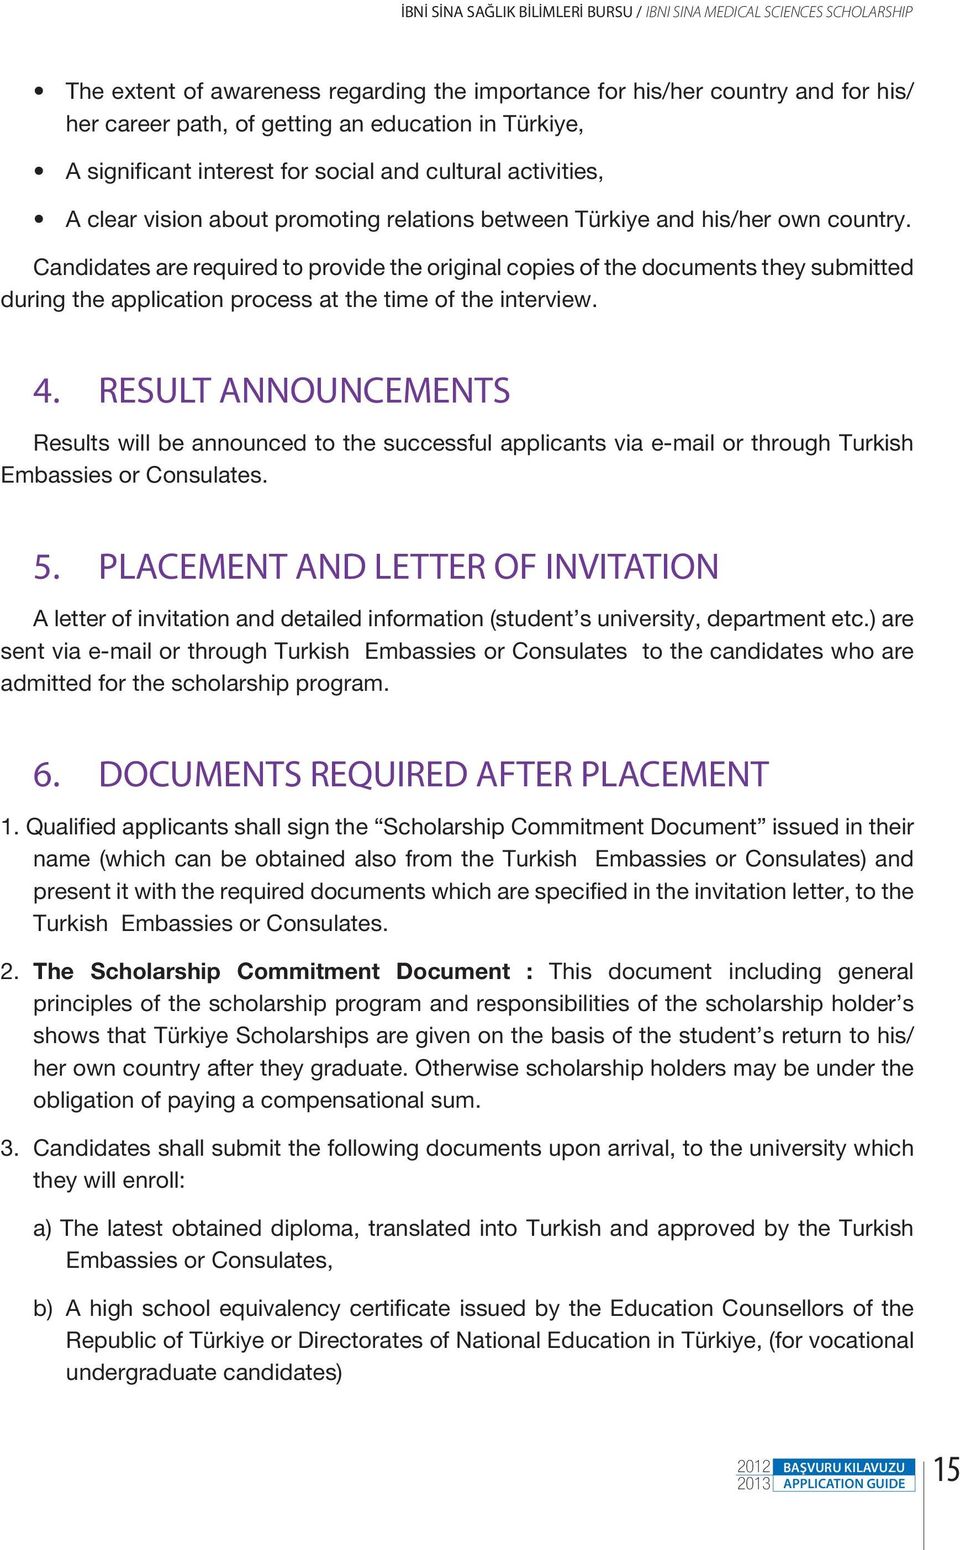 Candidates are required to provide the original copies of the documents they submitted during the application process at the time of the interview. 4.